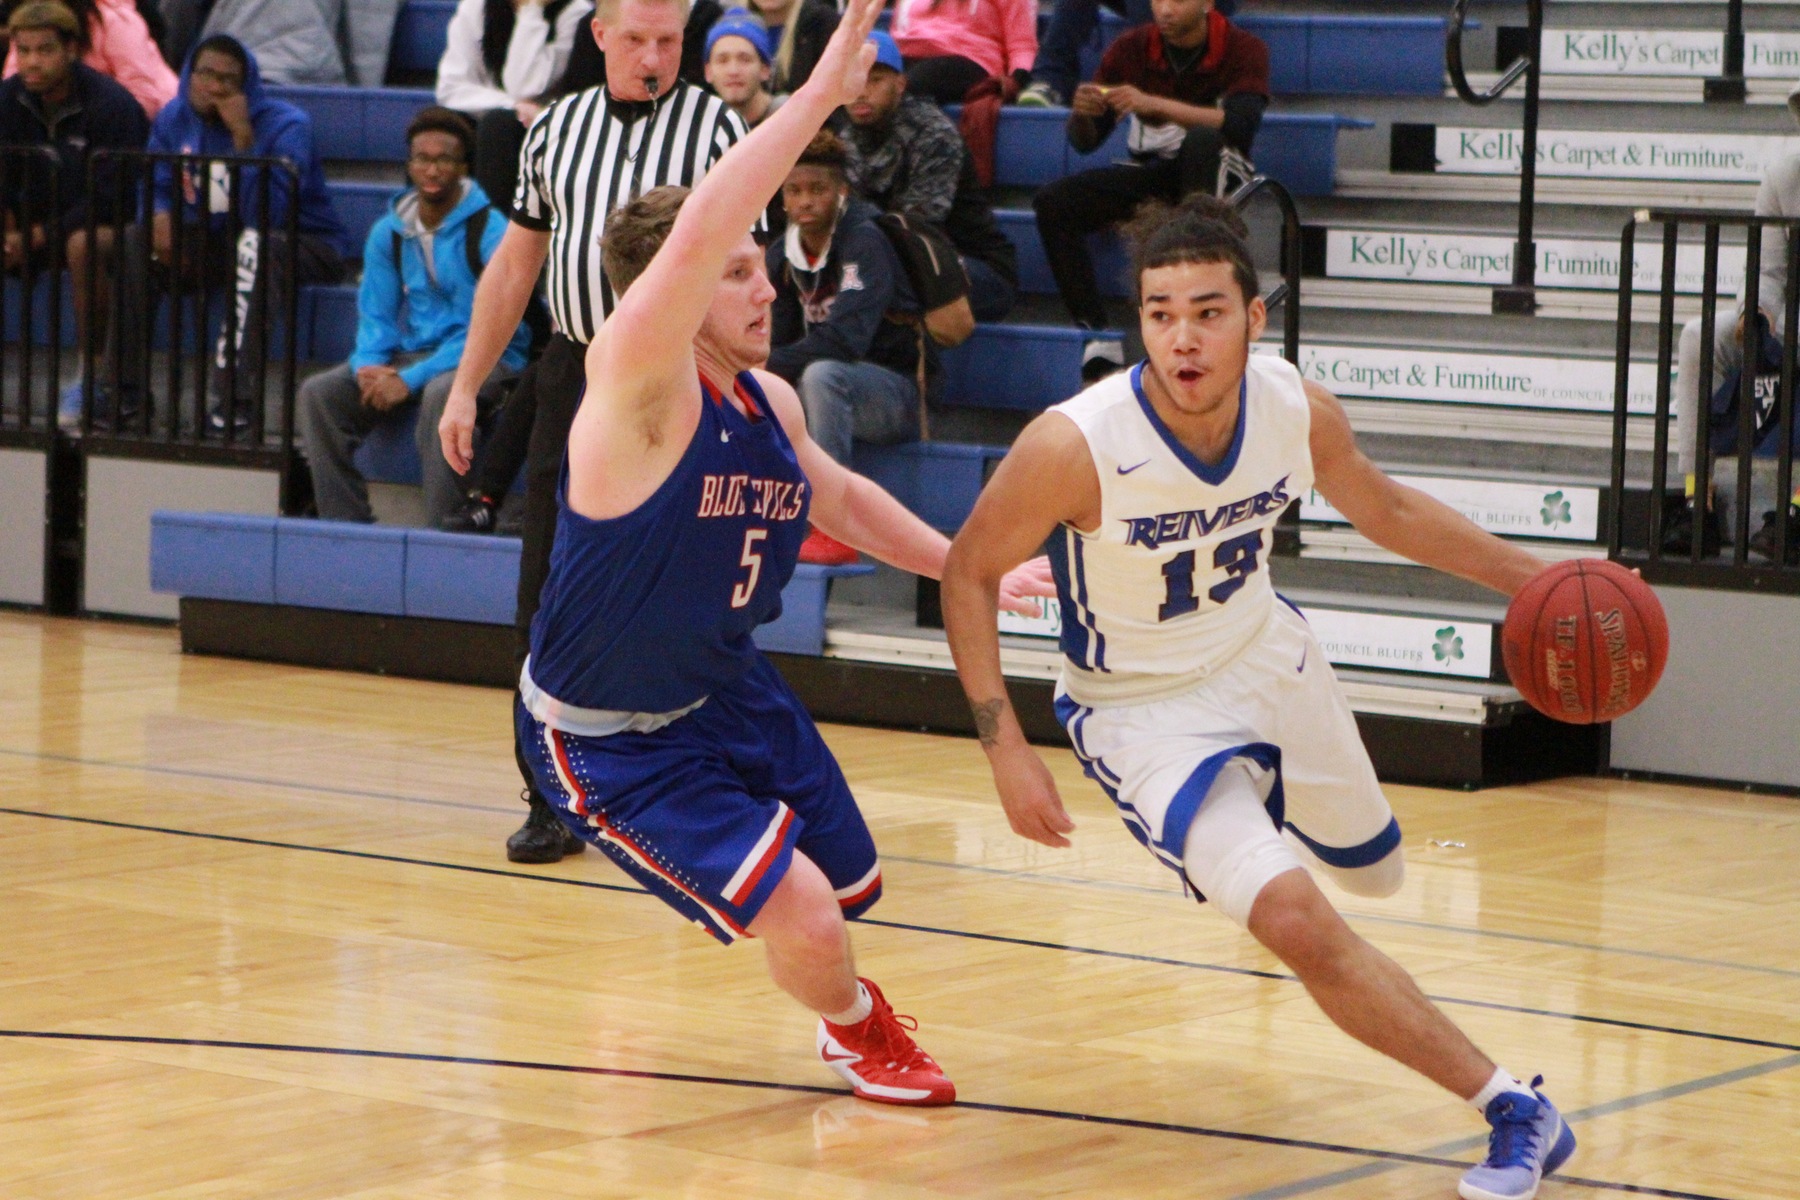 Iowa Western's Pat Dembley and his teammates opened up the 2017-18 season with a 111-85 victory at Kanesville Arena against the visiting Concordia University (NE) JV.